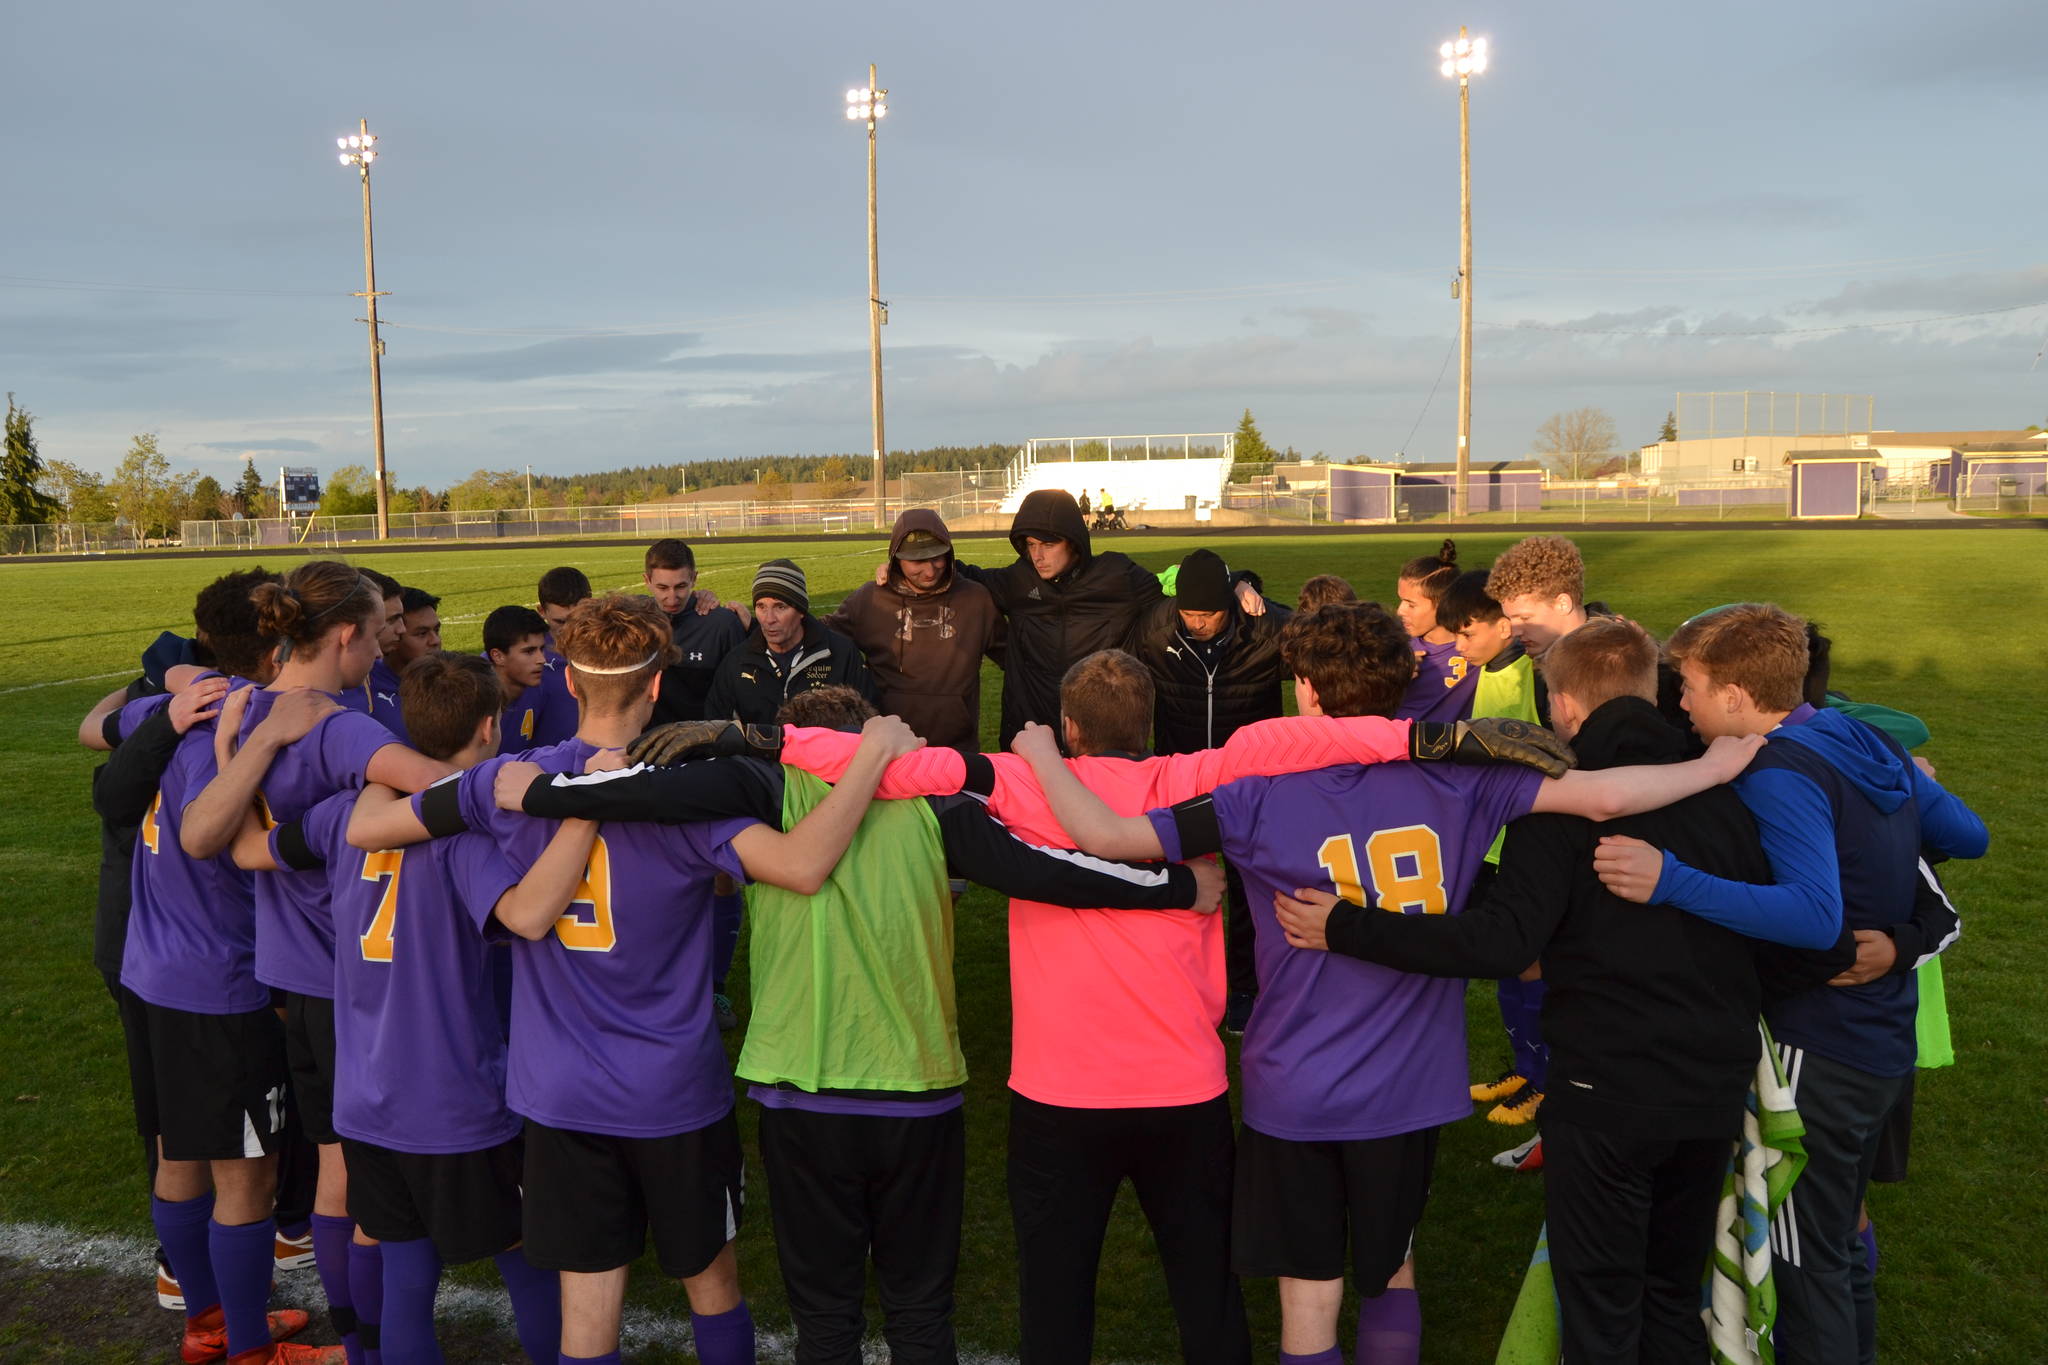 Sequim High School’s boys soccer team gathers at halftime during a spring 2019 league match. The stadium will be illumanted for 20 minutes at 8:20 p.m. (20:20 military time) on April 17 in honor of the spring prep athletes unable to complete their season after all state schools were closed in mid-March. Sequim Gazette file photo by Matthew Nash